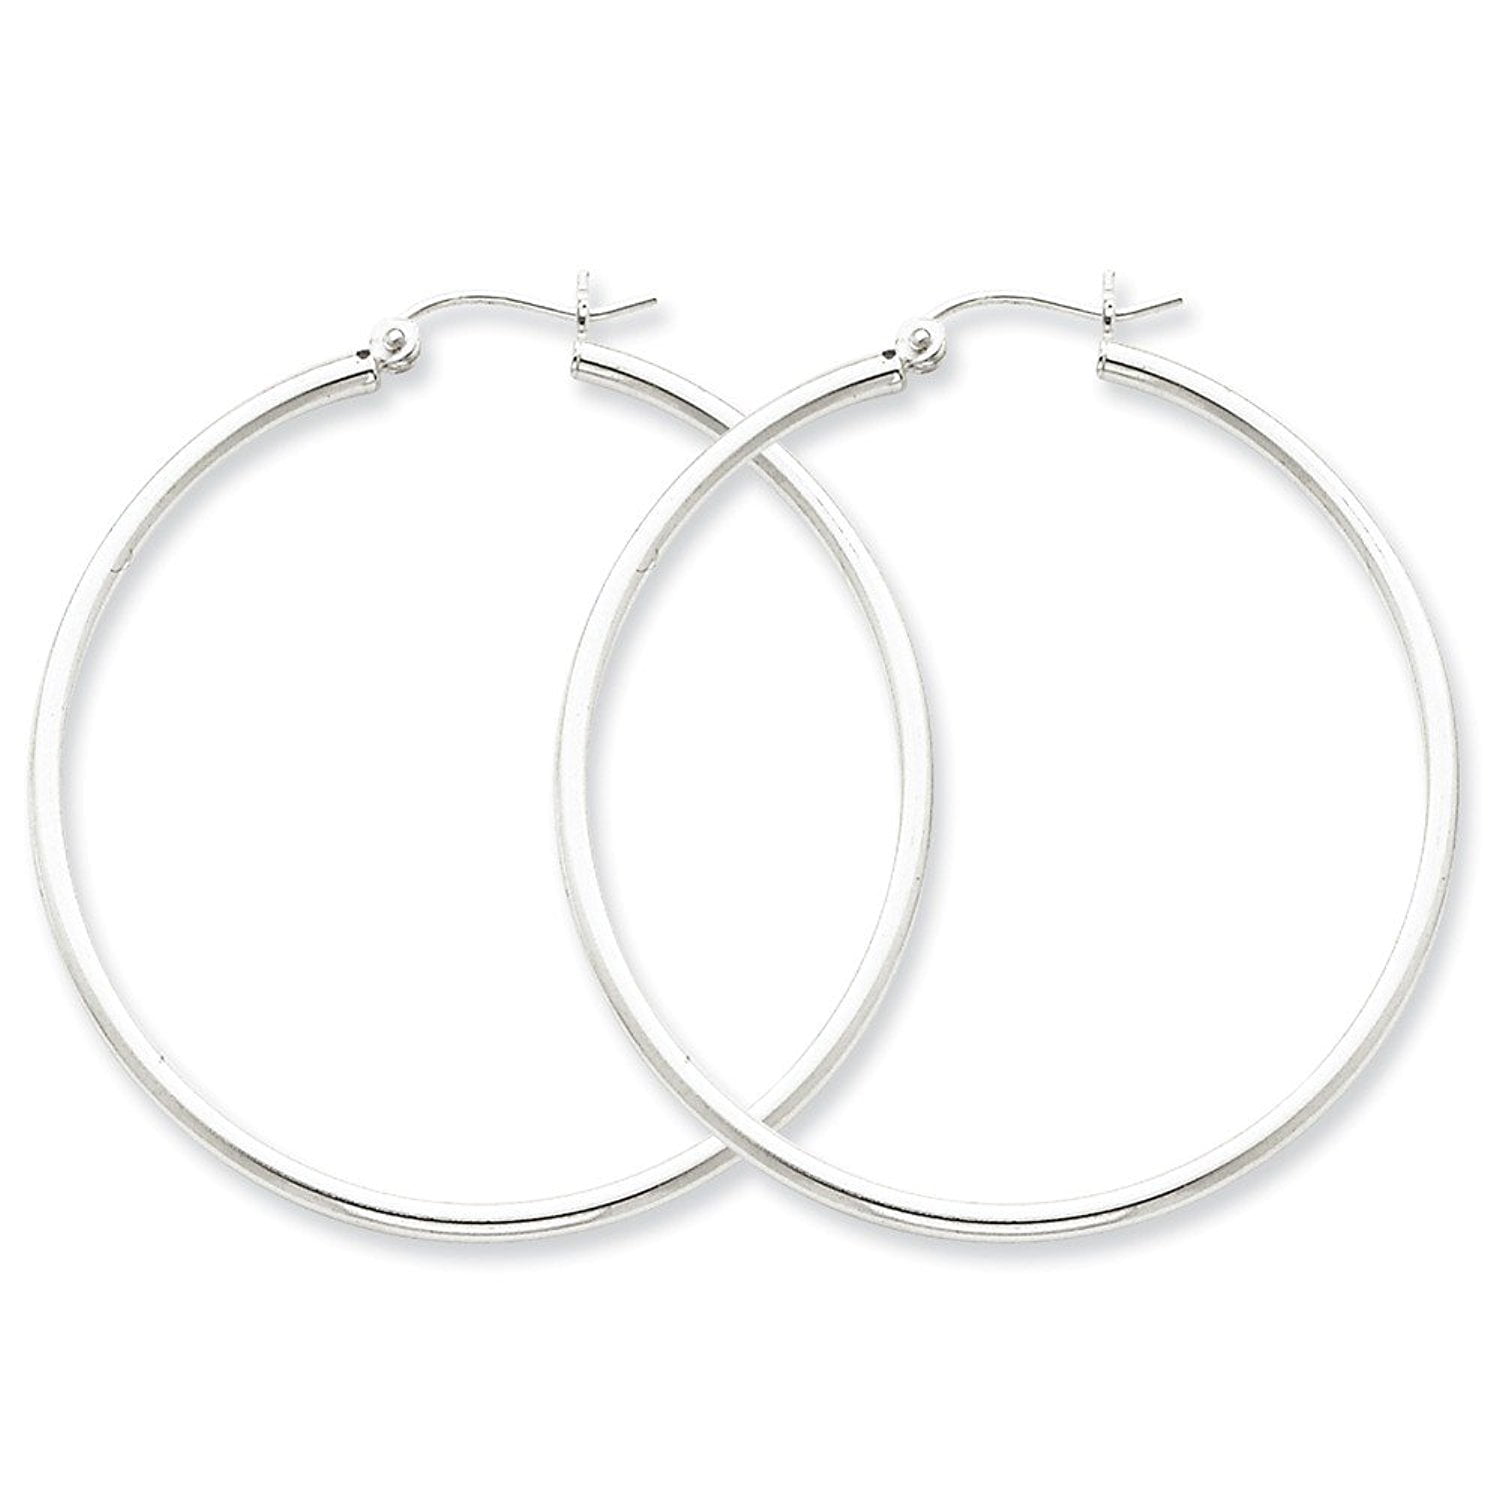 .925 Sterling Silver 47 MM Polished Round Classic Hoop Earrings